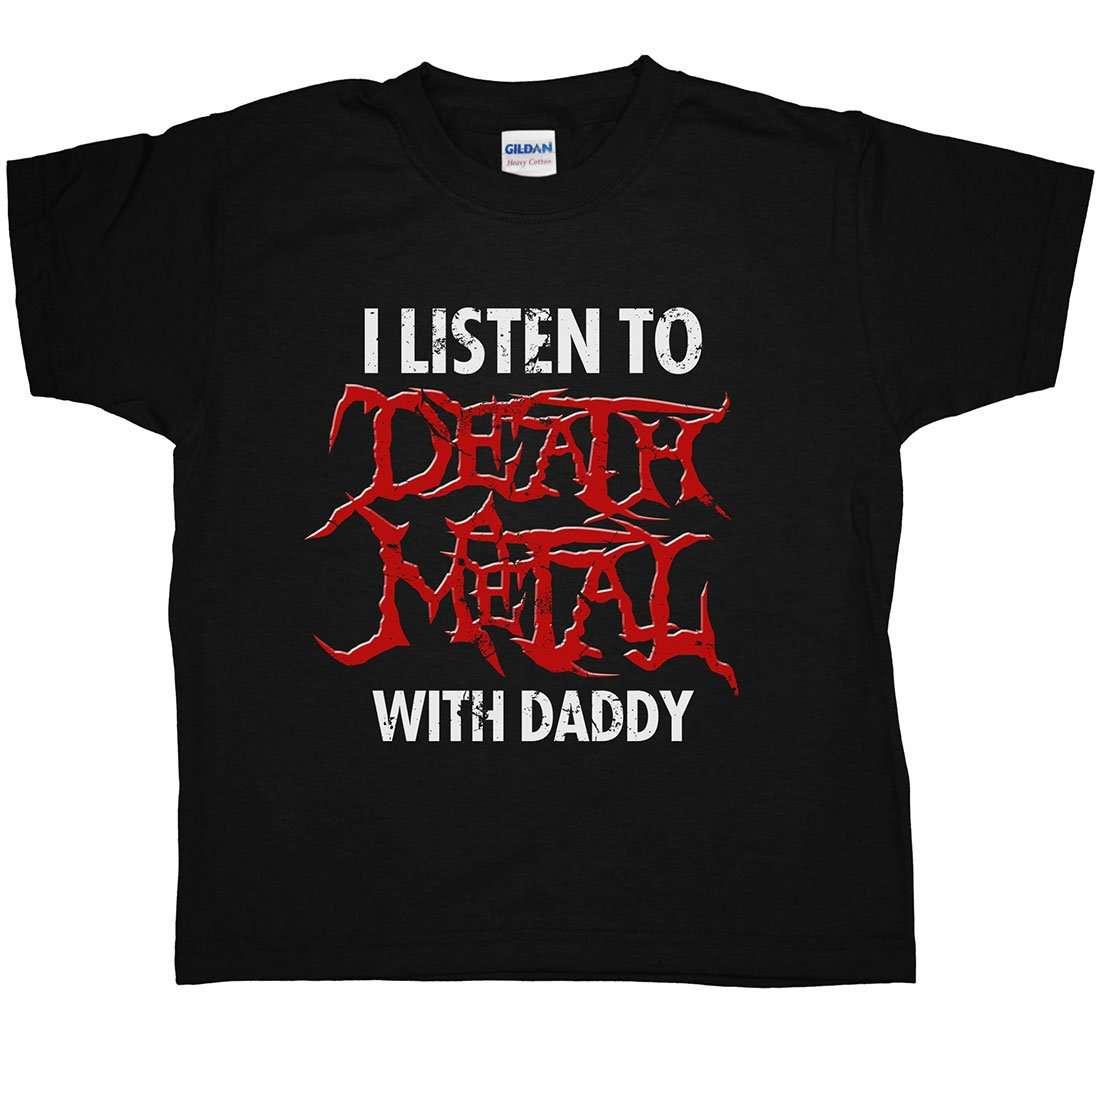 I Listen To Death Metal With Daddy Childrens Graphic T-Shirt 8Ball